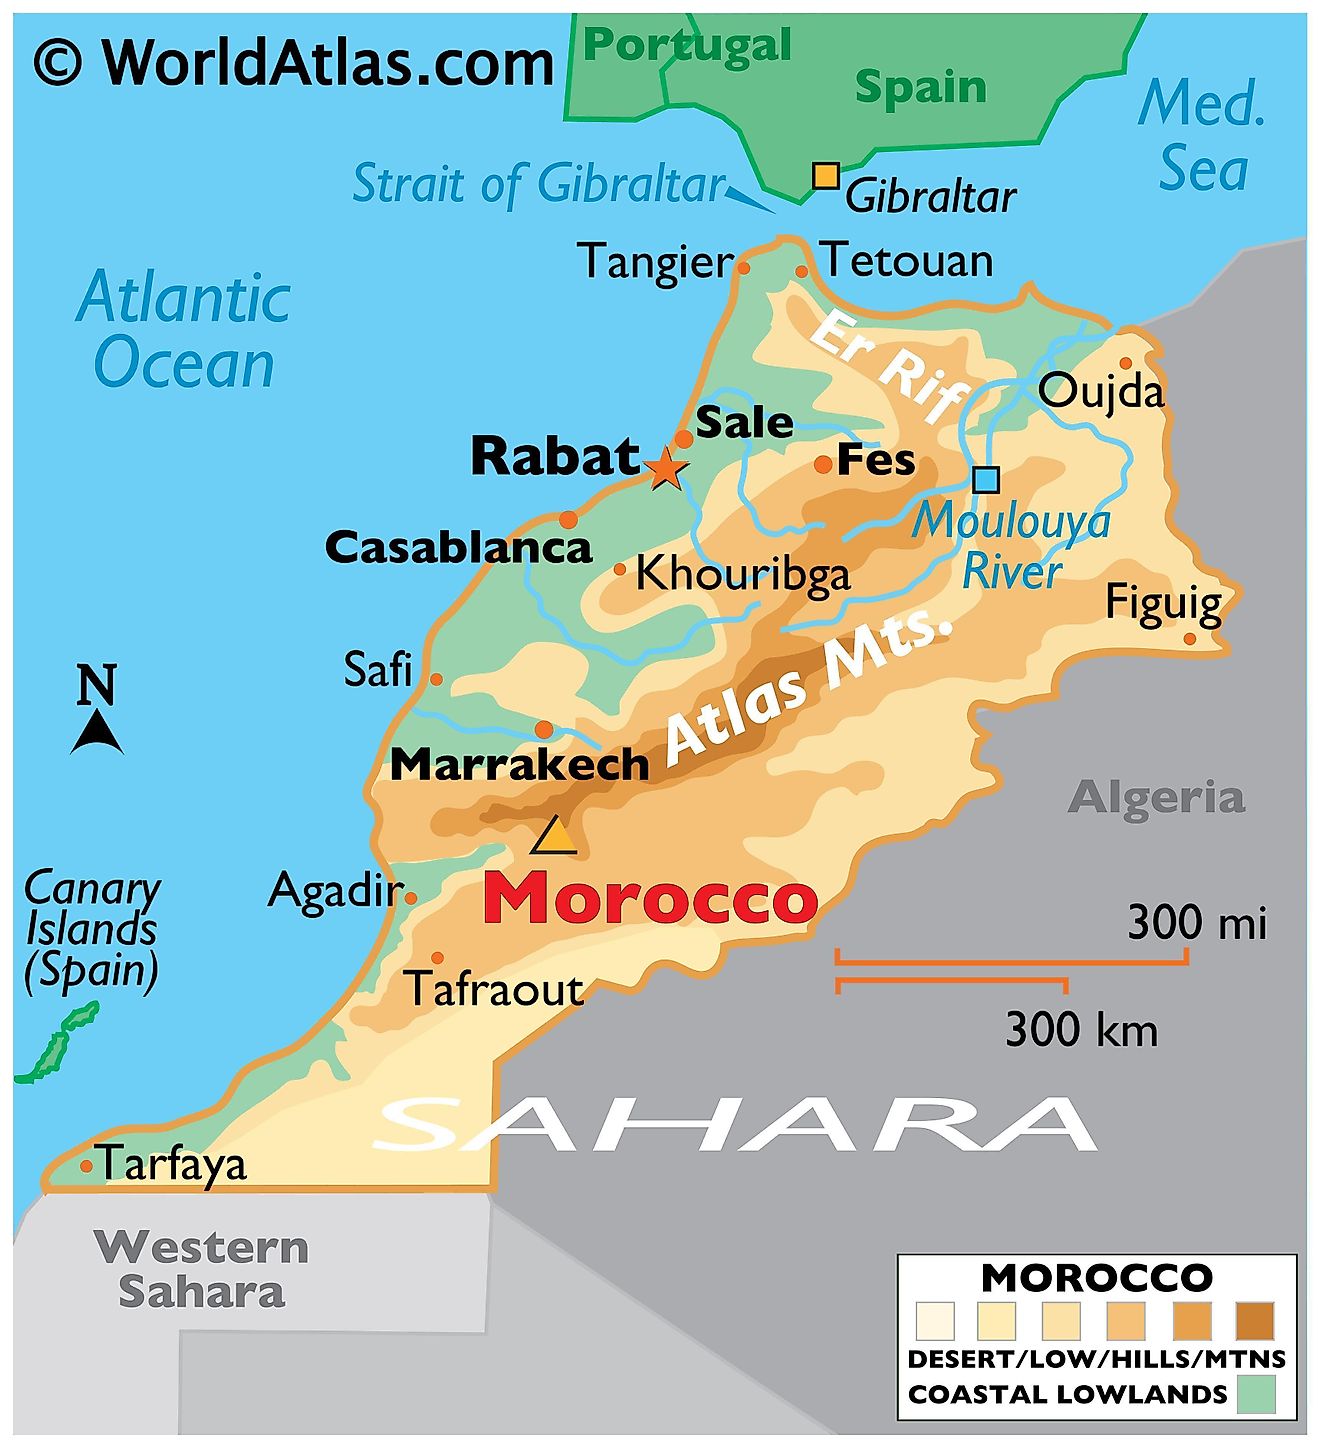 Physical Map of Morocco with state boundaries, major rivers, deserts, highest peak, important cities, and more.